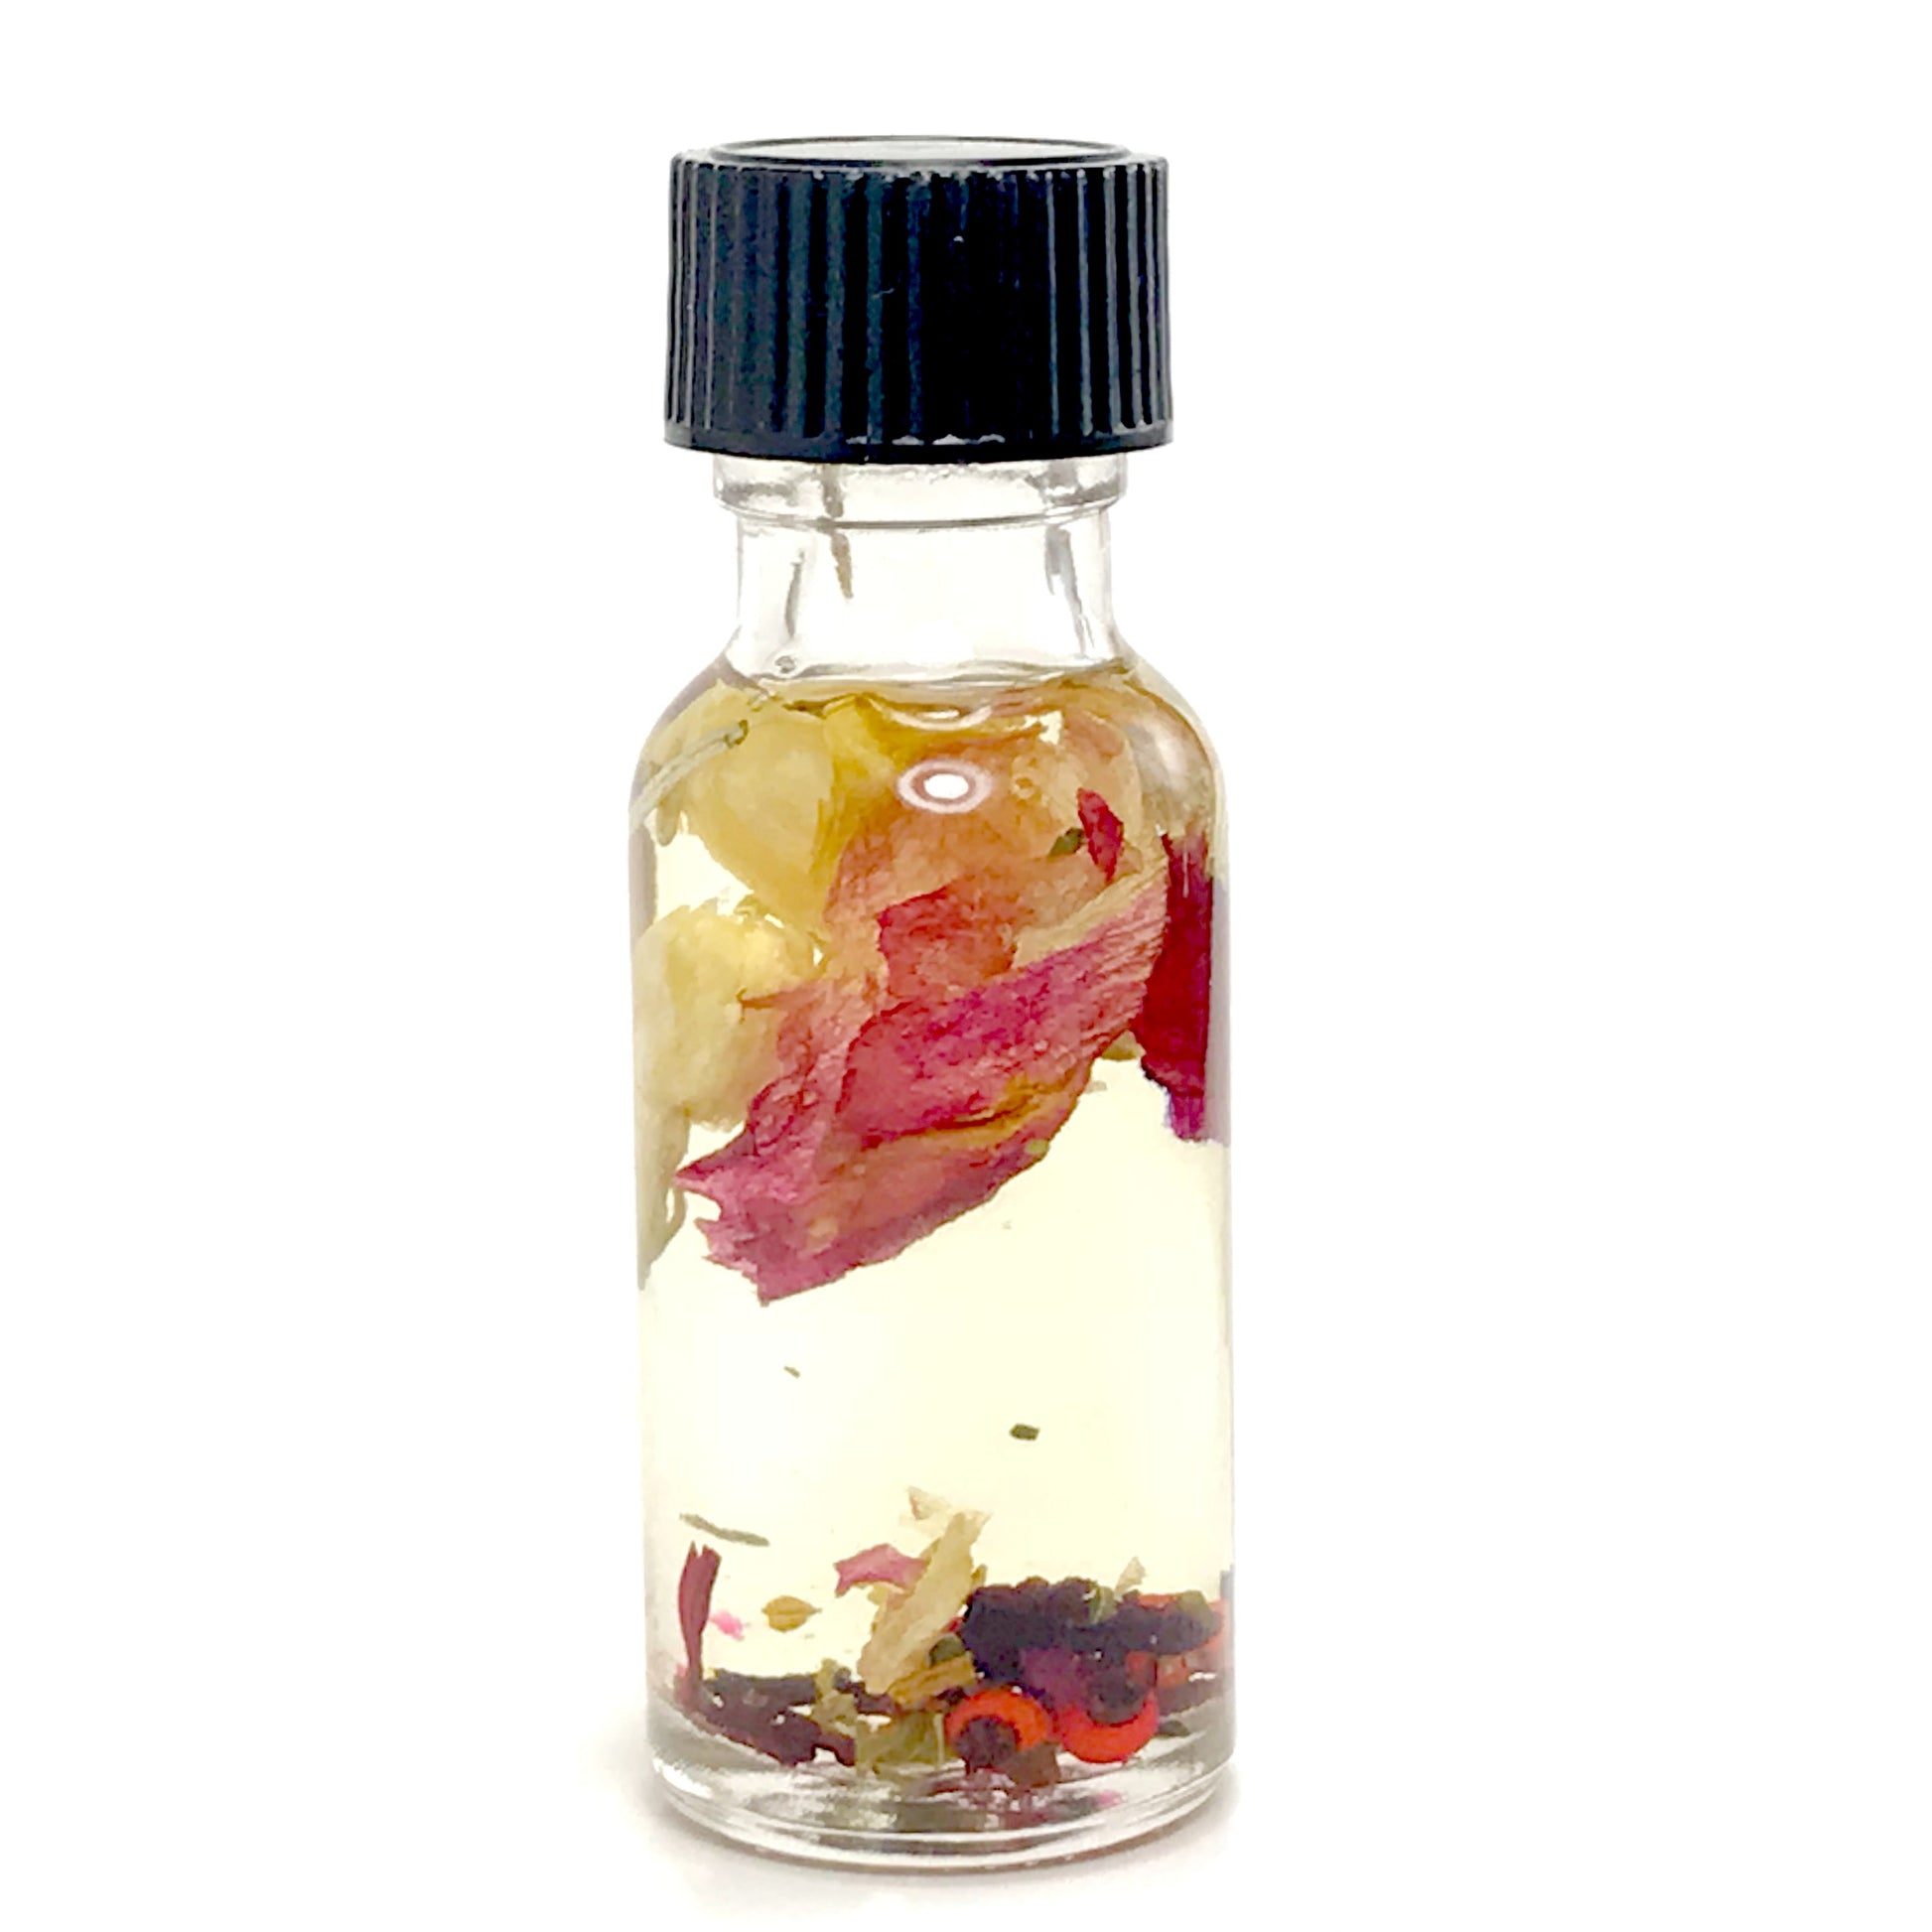 Twichery's Chuparrosa Oil, contains essential oil of honeysuckle to prompt true love forever. Hooodoo, Spiritual Anointing Oil, washing, dressing, incense